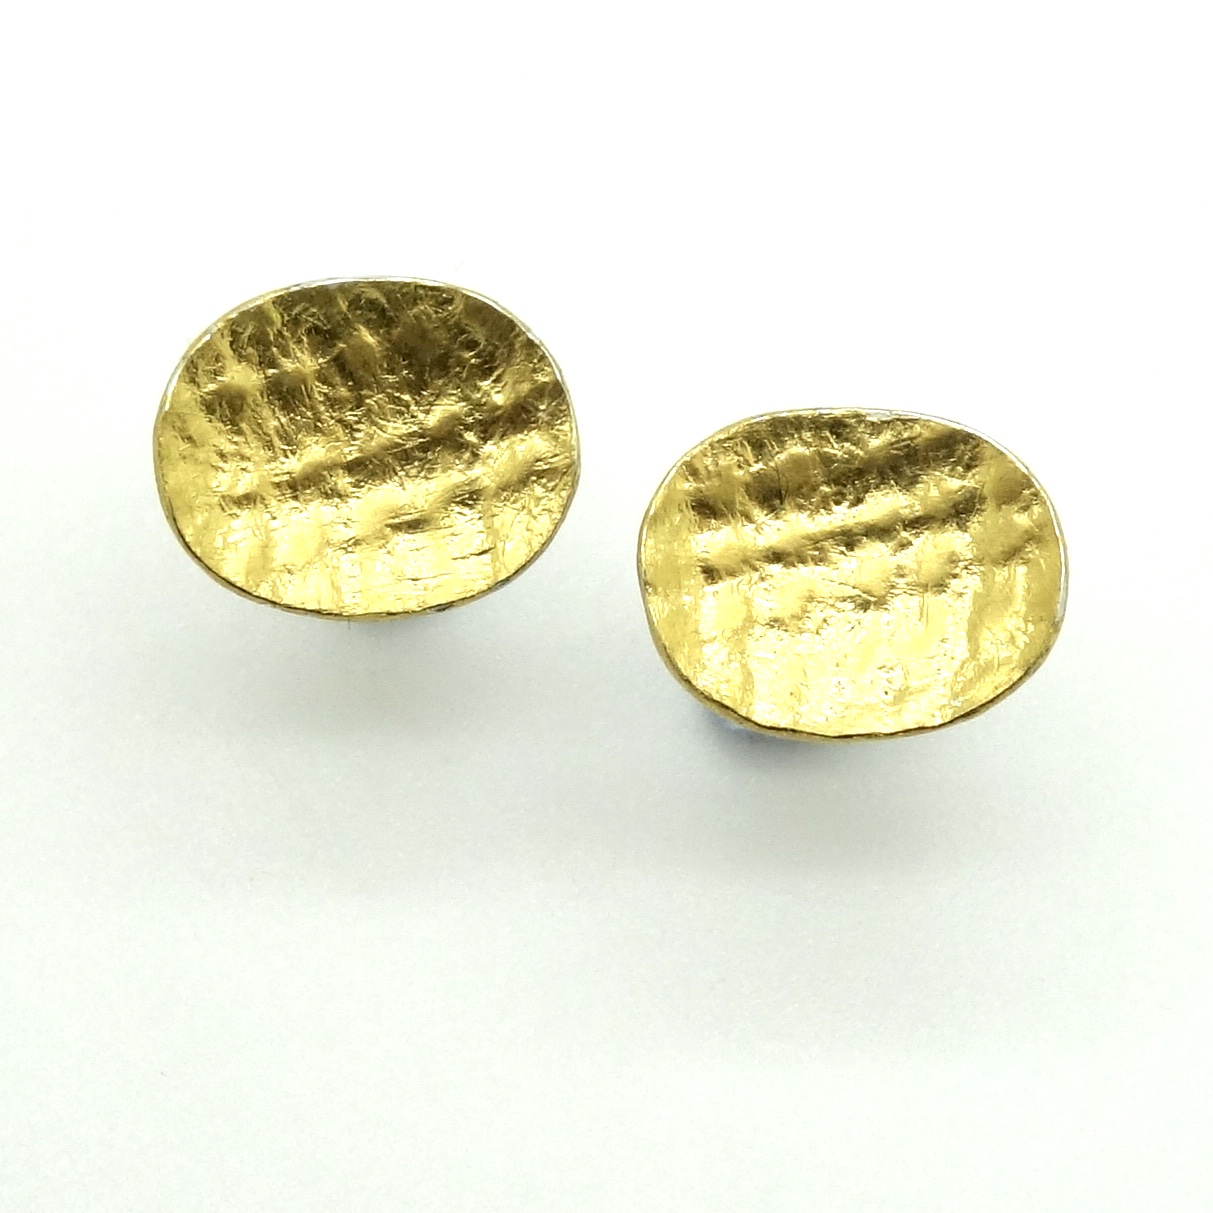 Oval studs | Contemporary Earrings by contemporary jewellery designer ...